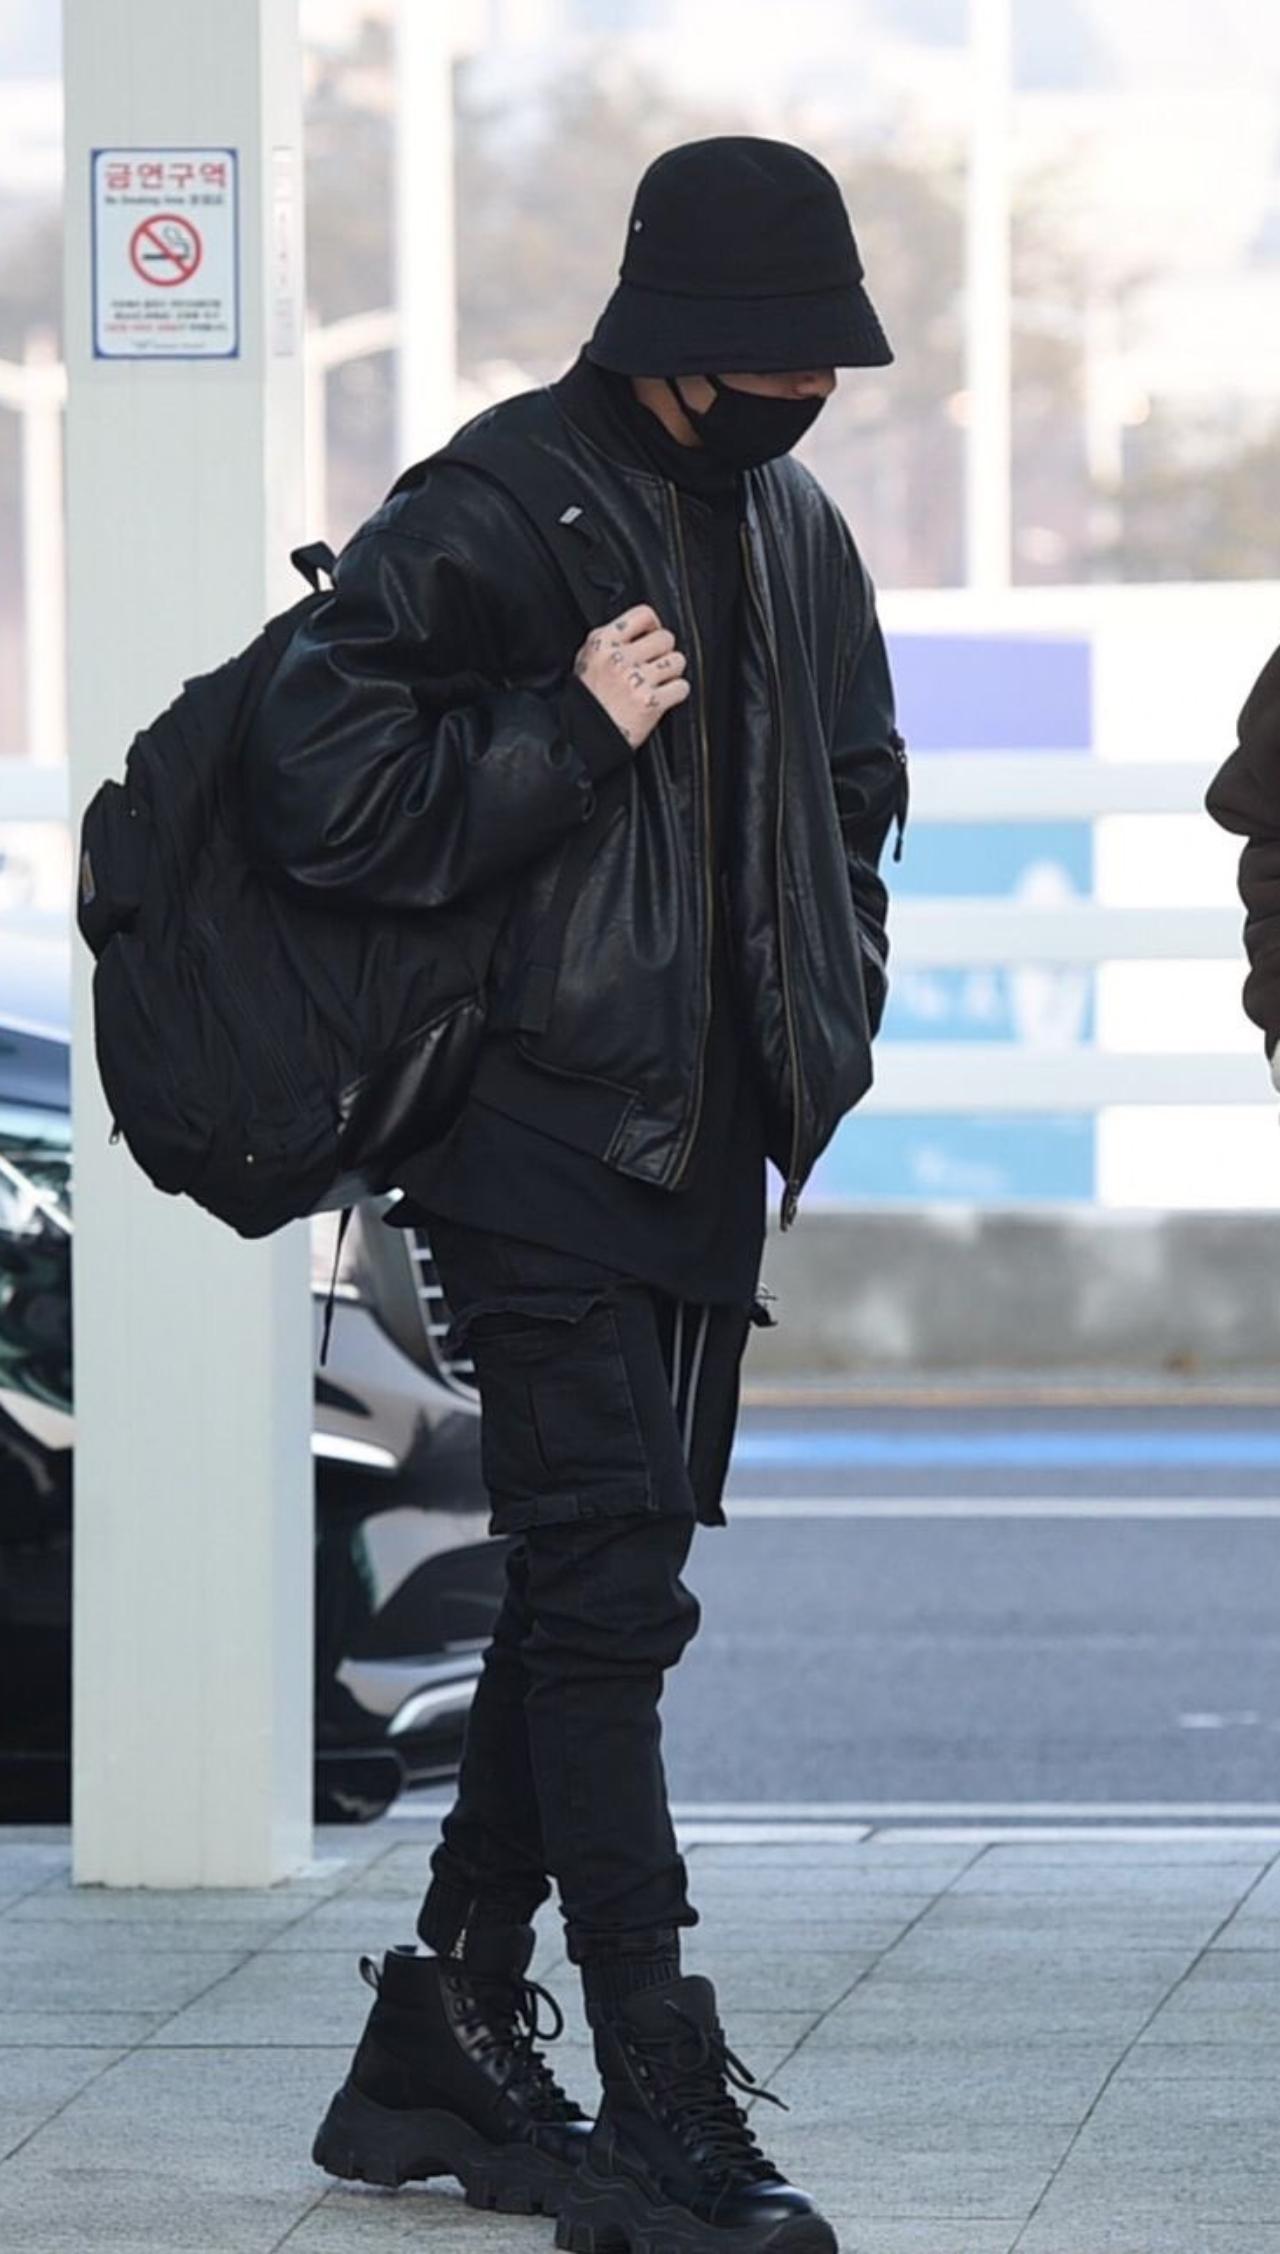 We are not kidding when we say Jungkook is a massive fan of black - as seen in this all-black fashion airport ensemble. Jungkook can intuitively mix and match streetwear and more formals - for example, he looks effortlessly good in this black leather jacket, boots and slightly baggy hip-hop-esque pocketed pants. He didn't even spare his bag!